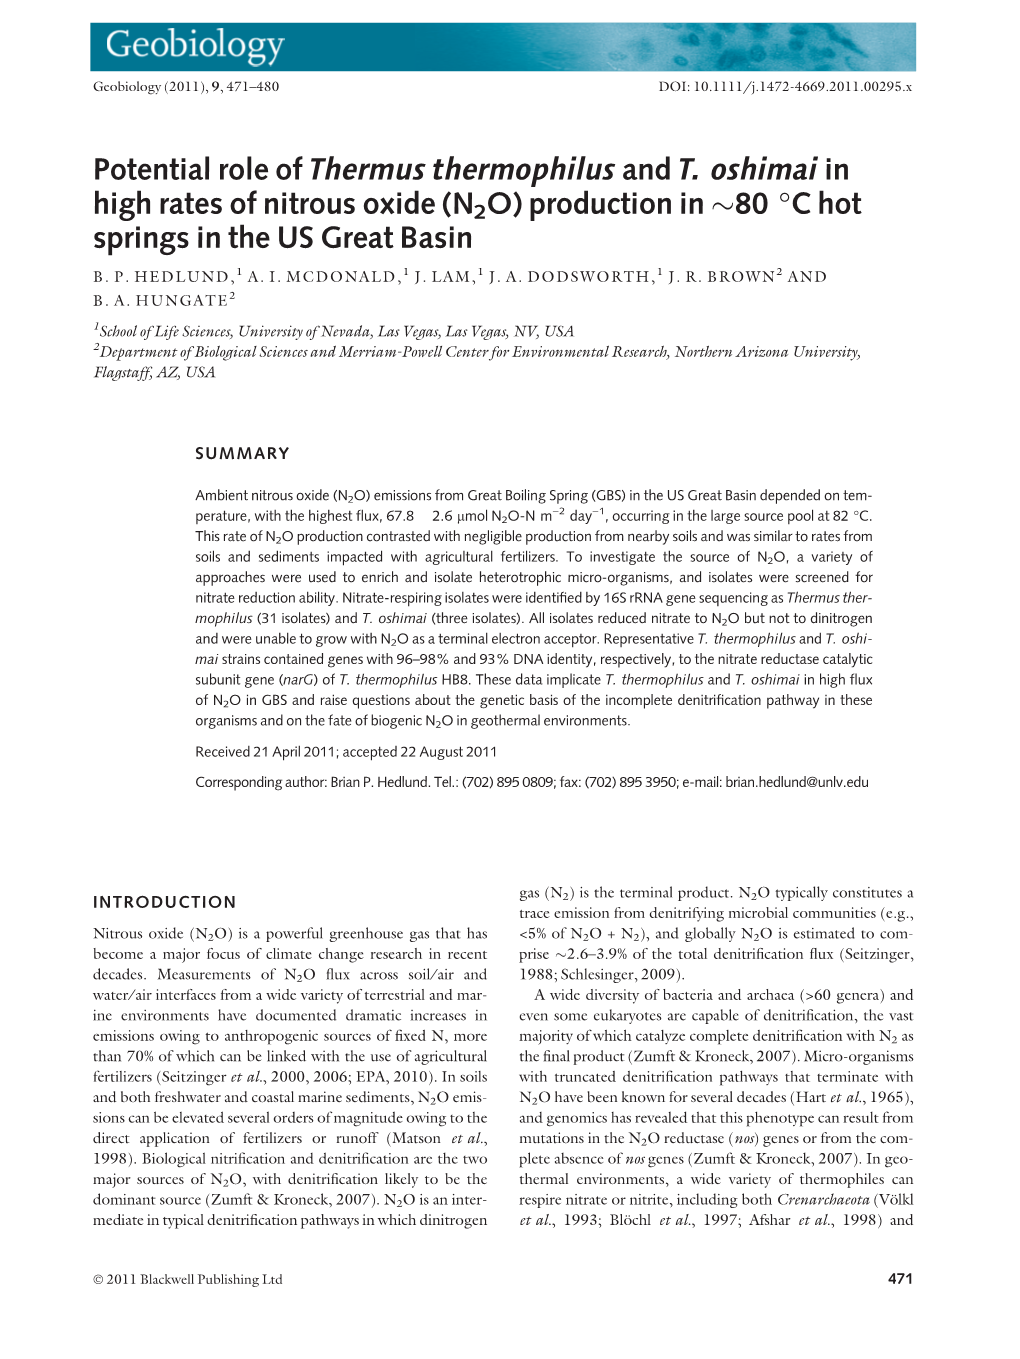 Potential Role of Thermus Thermophilus and T.Oshimai in High Rates of Nitrous Oxide (N2O) Production in 80C Hot Springs in the U